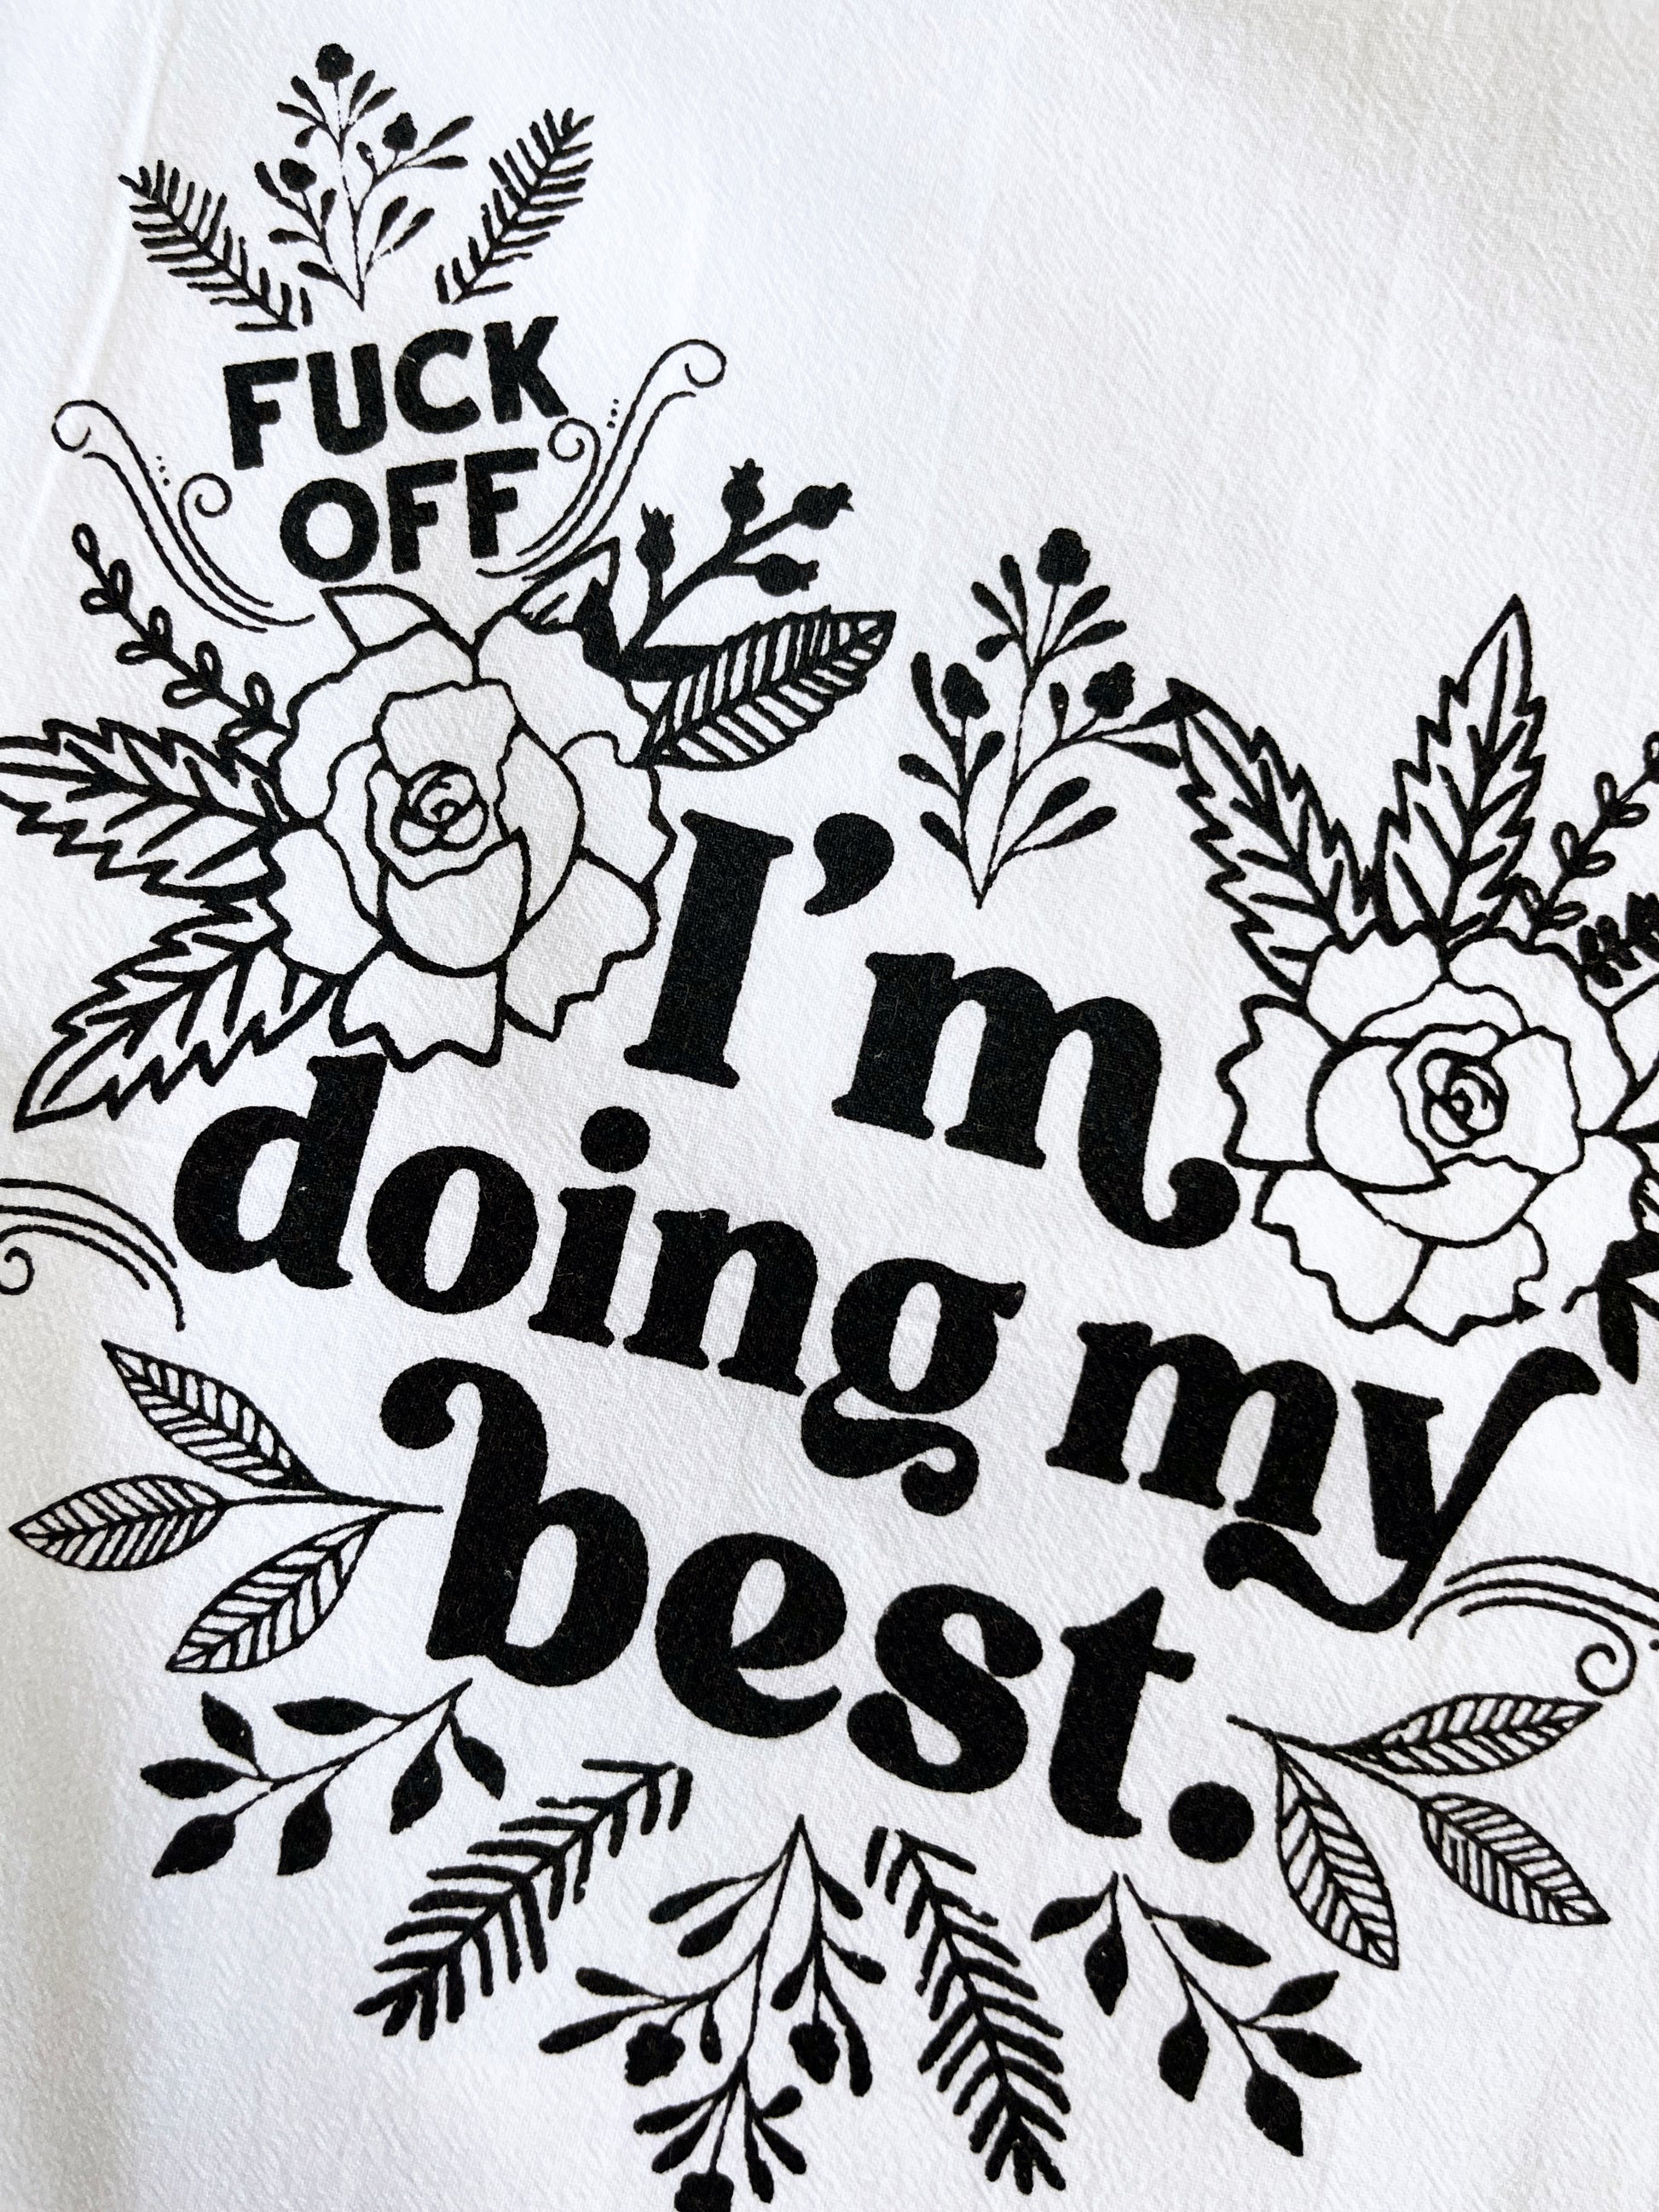 pretty floral screen printed tea towel vintage retro design fuck off i'm doing my best sarcastic home decor gifts funny decorative kitchen towels coin laundry funny cotton dish towels 